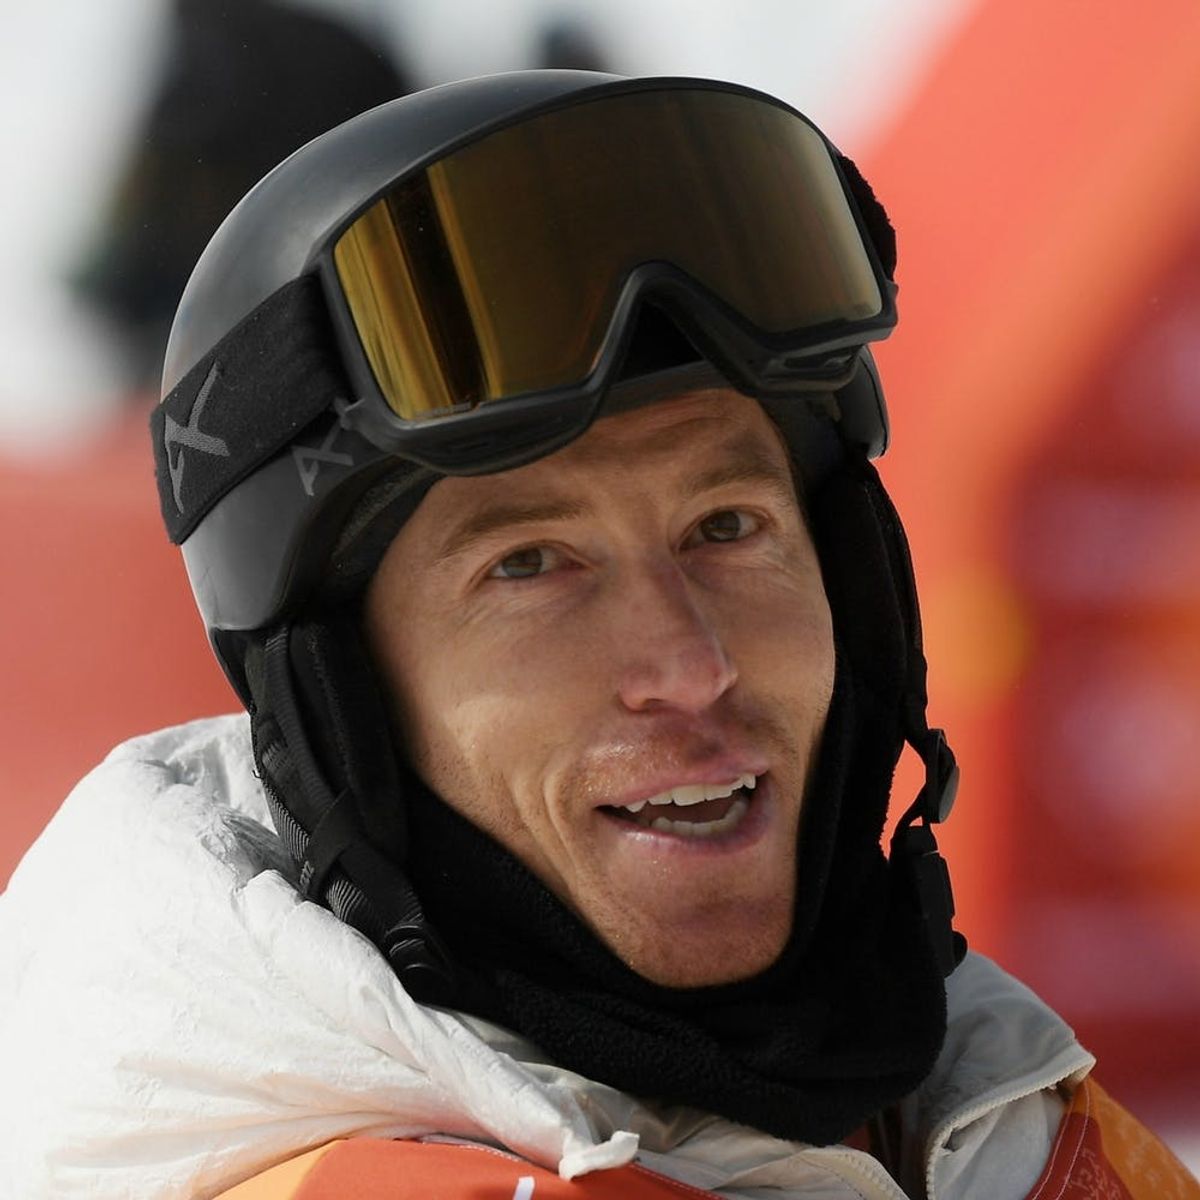 Olympic Snowboarder Shaun White Was Accused of Harassment by a Former Band Member